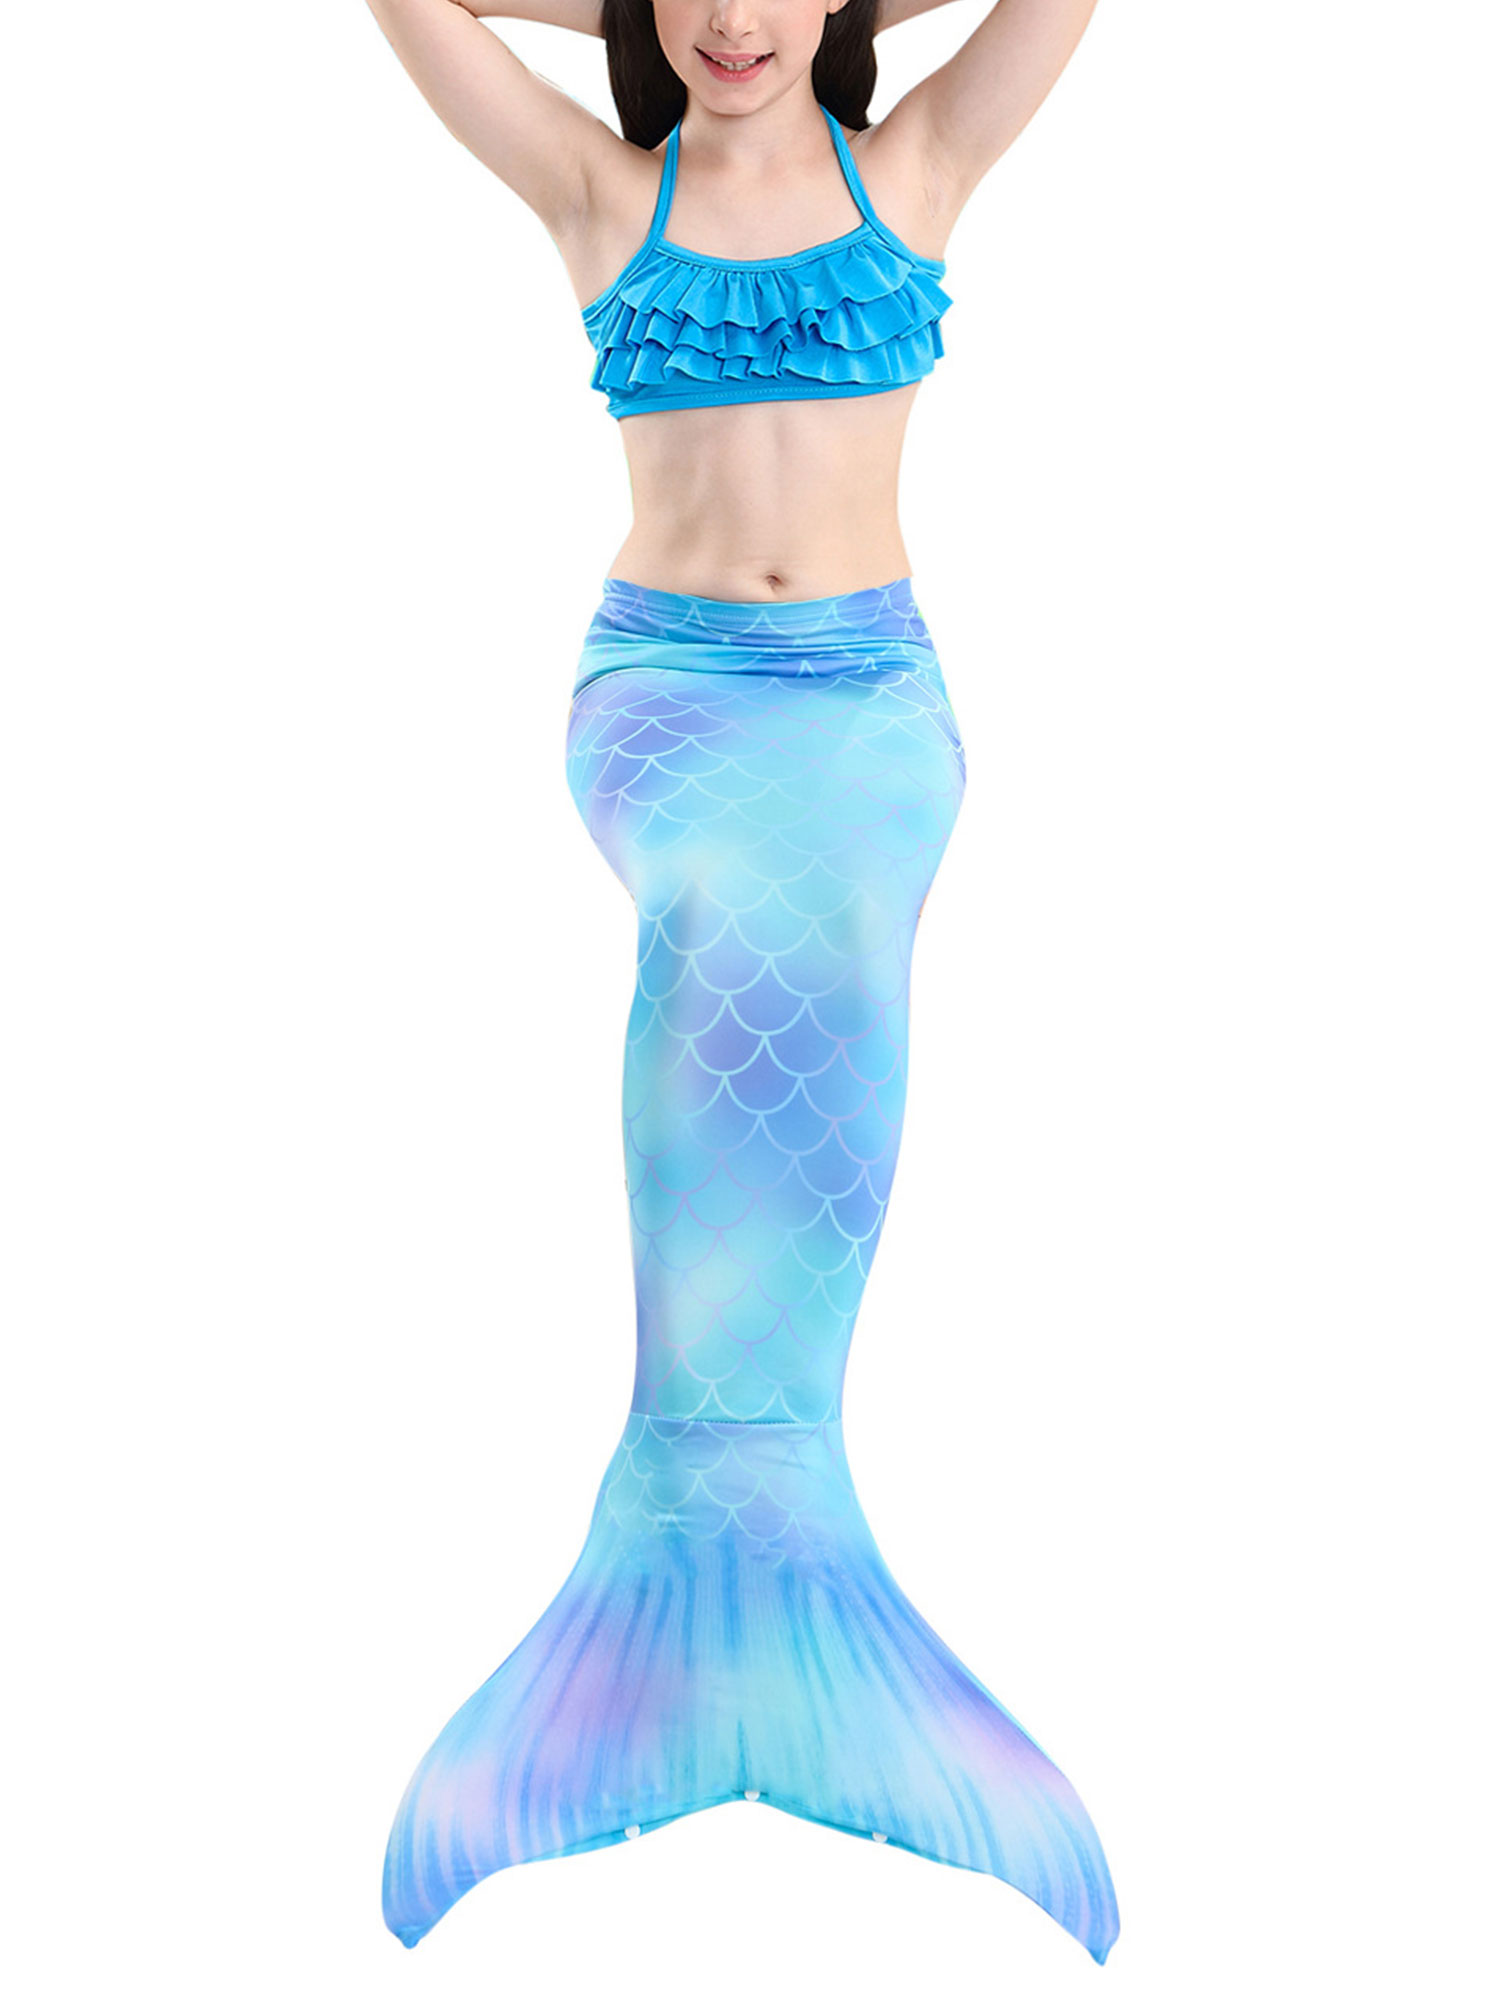 No Monofin Mermaid Tail Tails Swimmable Costume Swimsuit for Girls Swimming